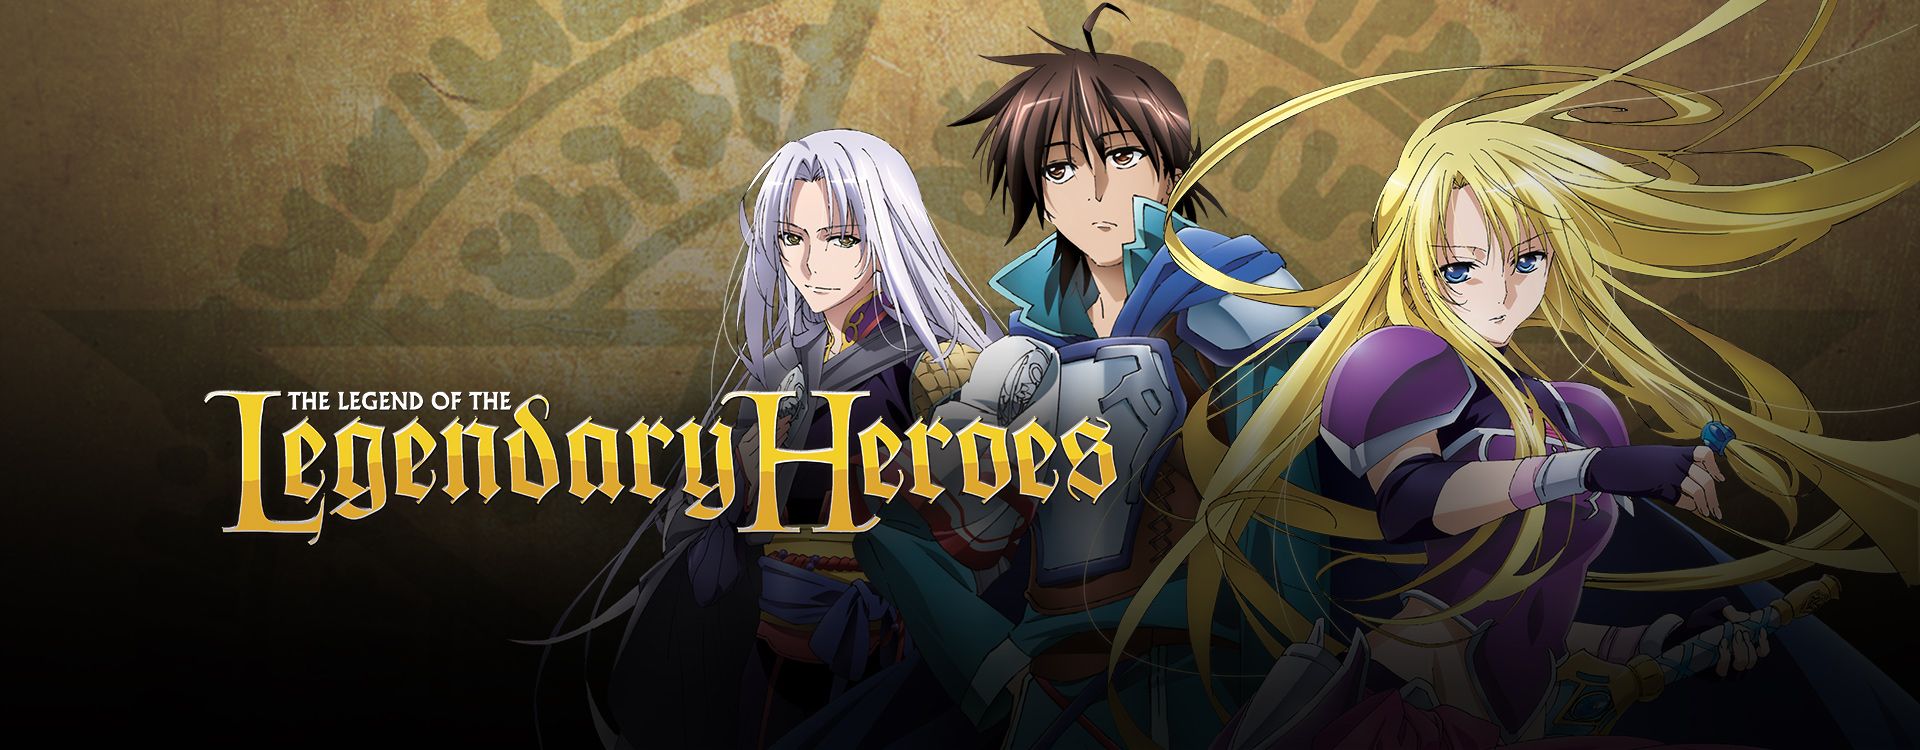 Watch The Legend Of The Legendary Heroes Sub & Dub. Action Adventure, Fantasy Anime